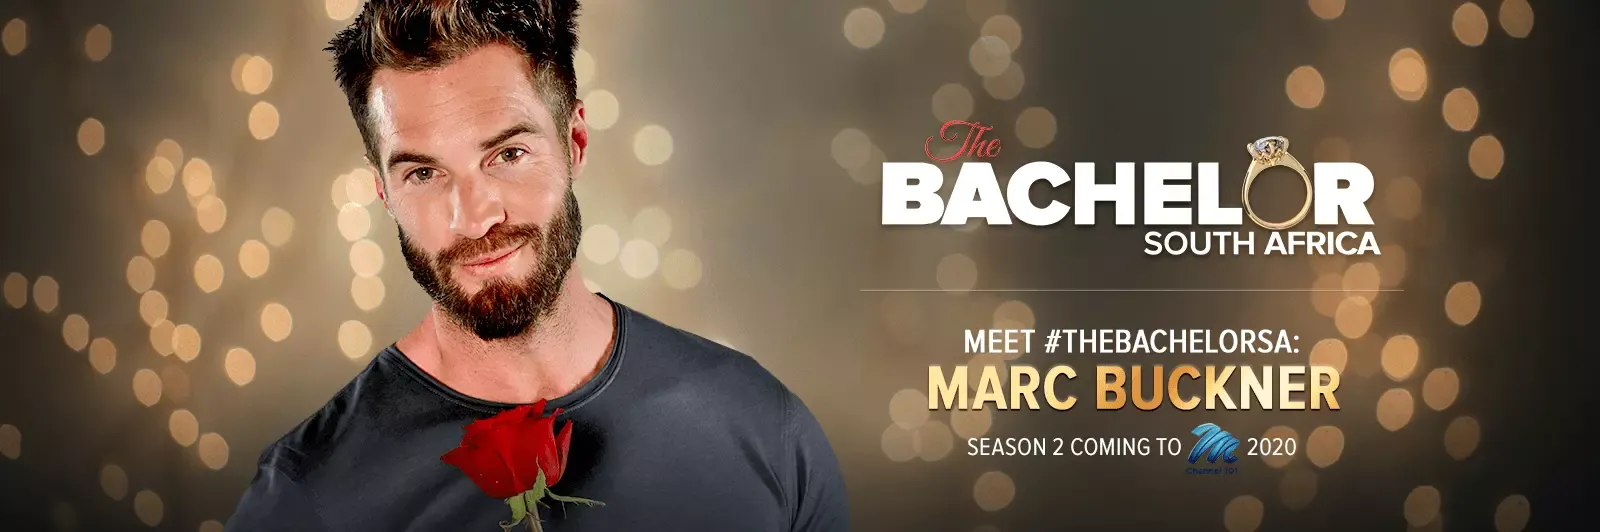 watchthisspace - Bachelor South Africa - Marc Buckner - Season 2 - SM Media - Discussion  1567859849-27_TBSA_S2___Web_Billboard_1600_x_640